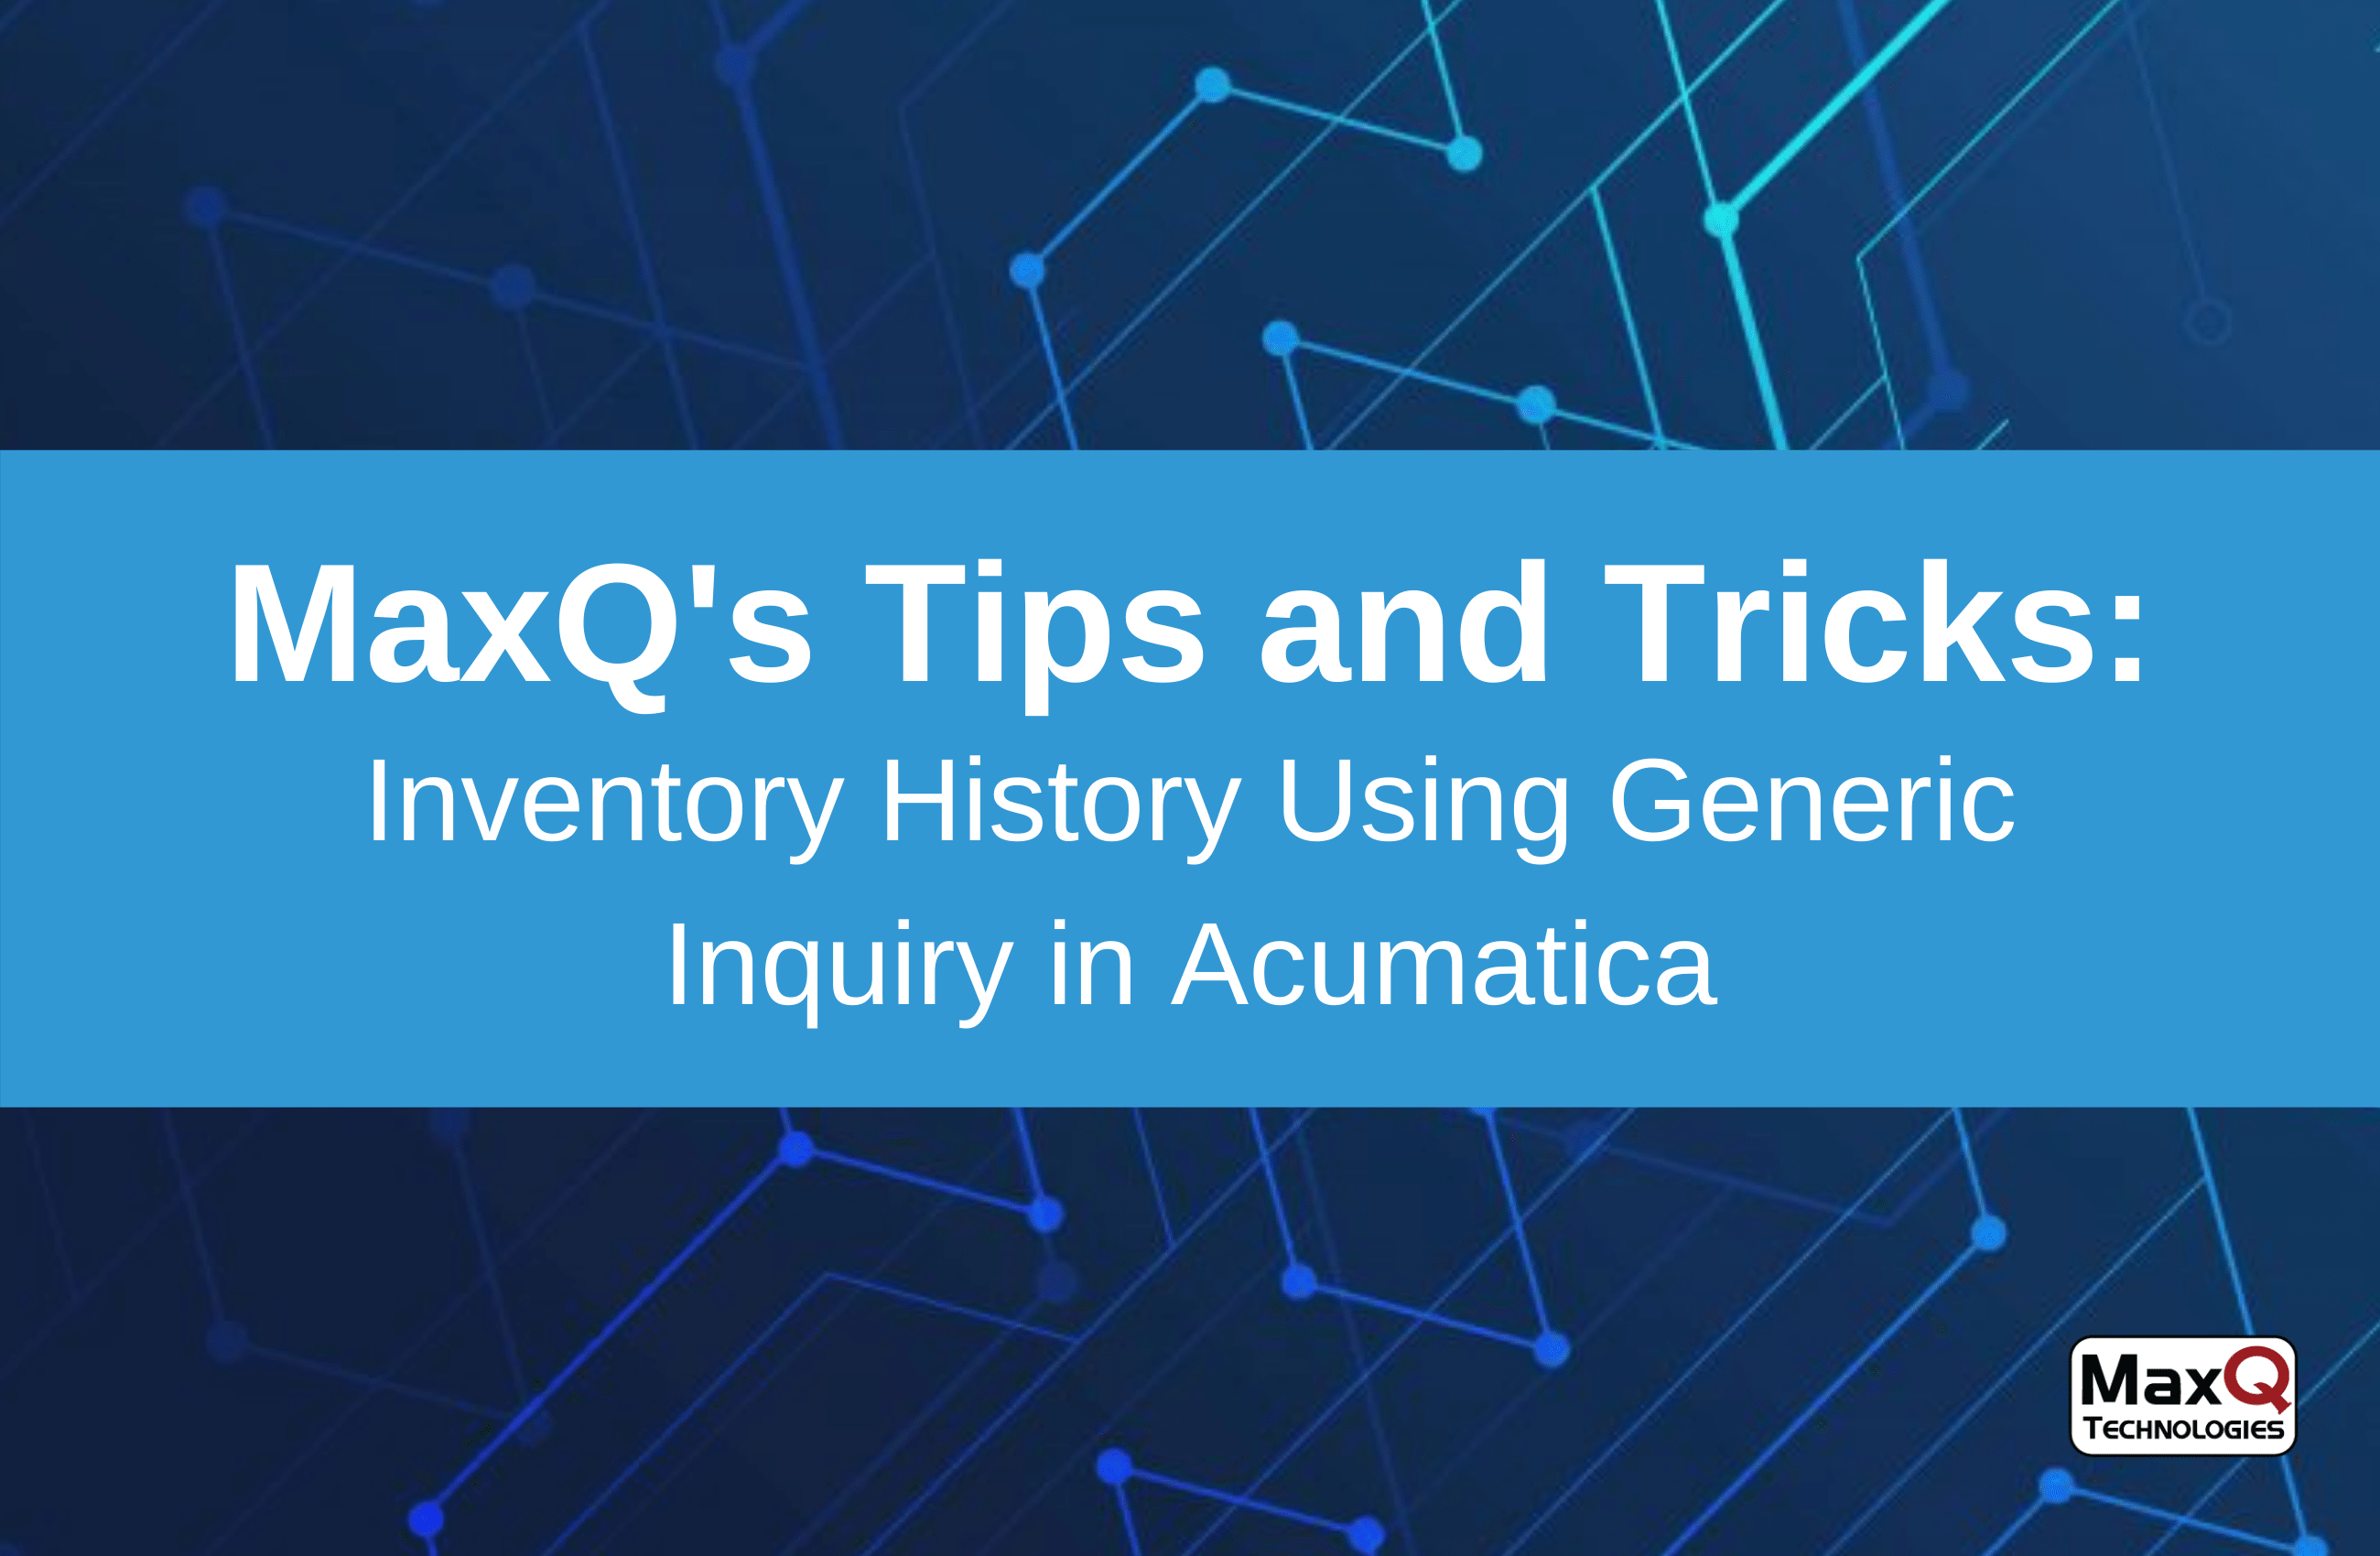 You are currently viewing Inventory History Using Generic Inquiry in Acumatica